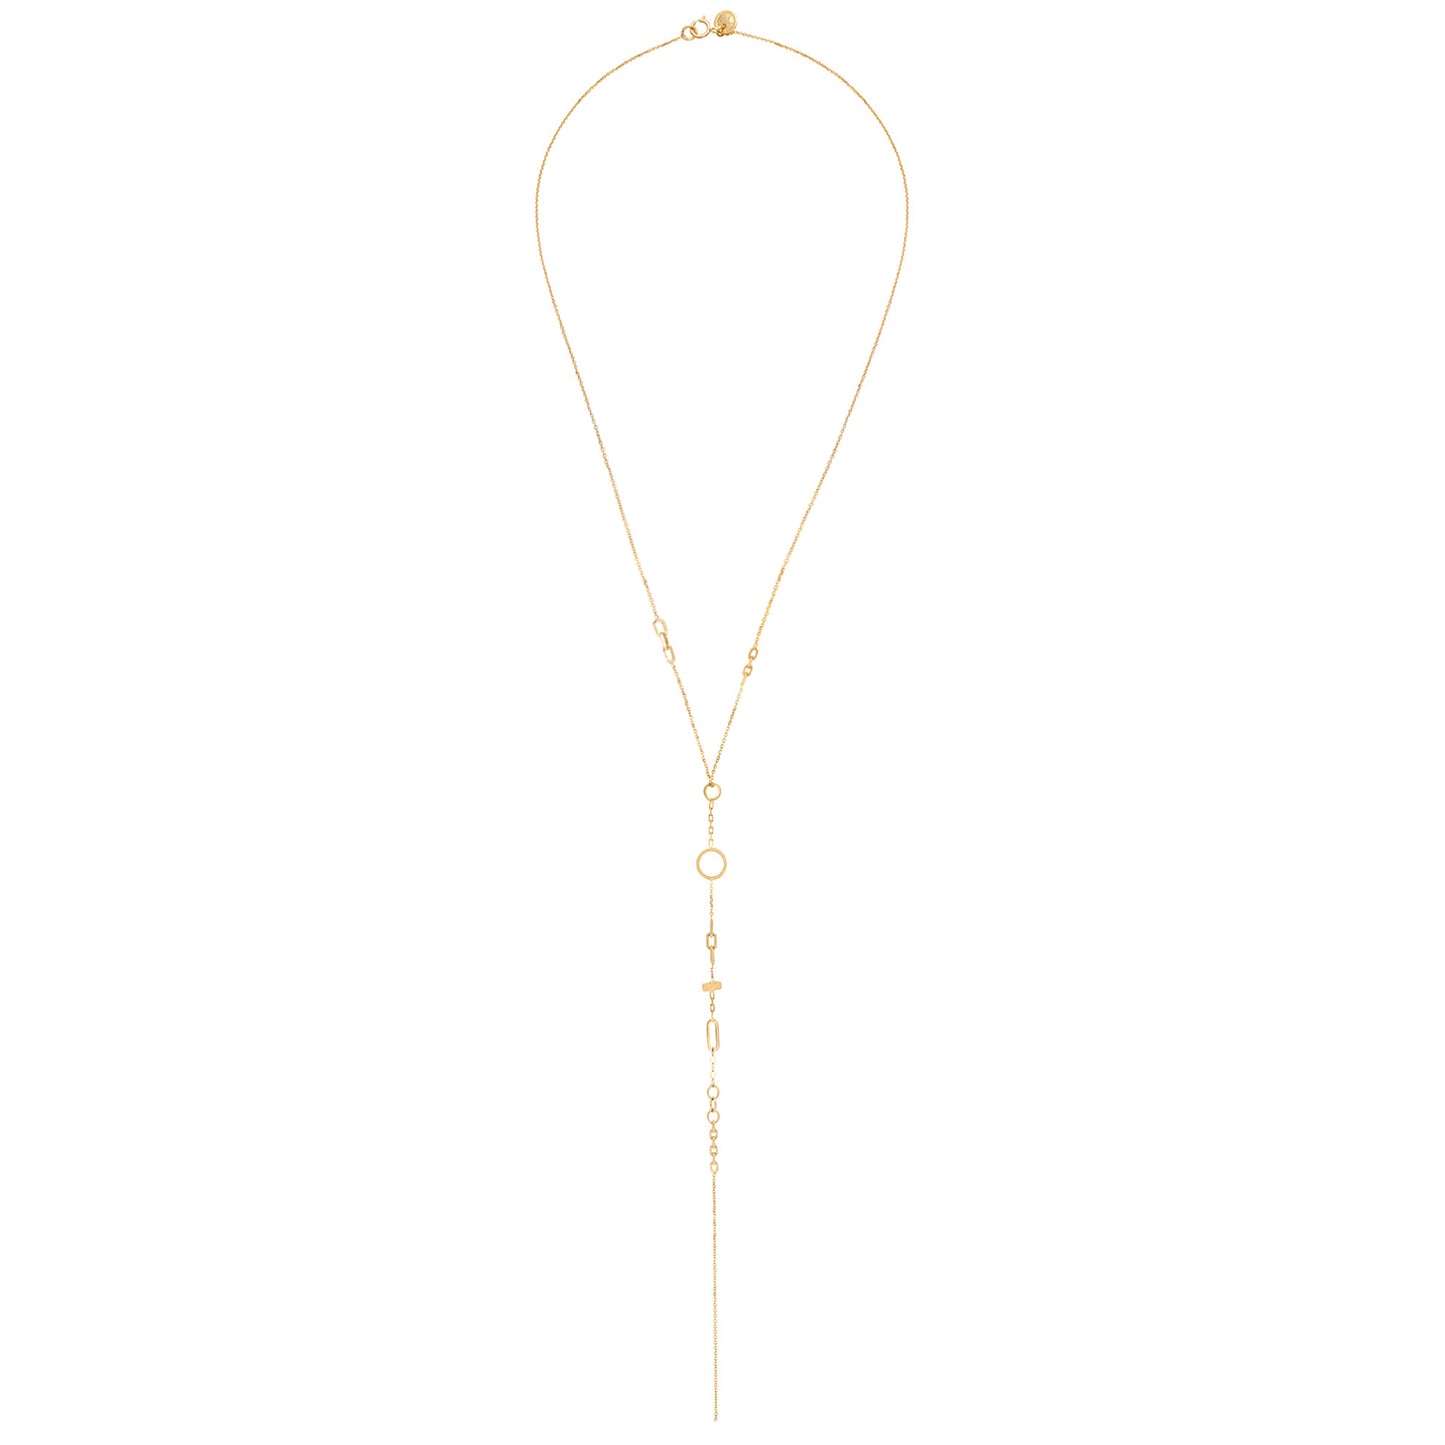 18ct Gold Chains Galore Lariat Necklace.